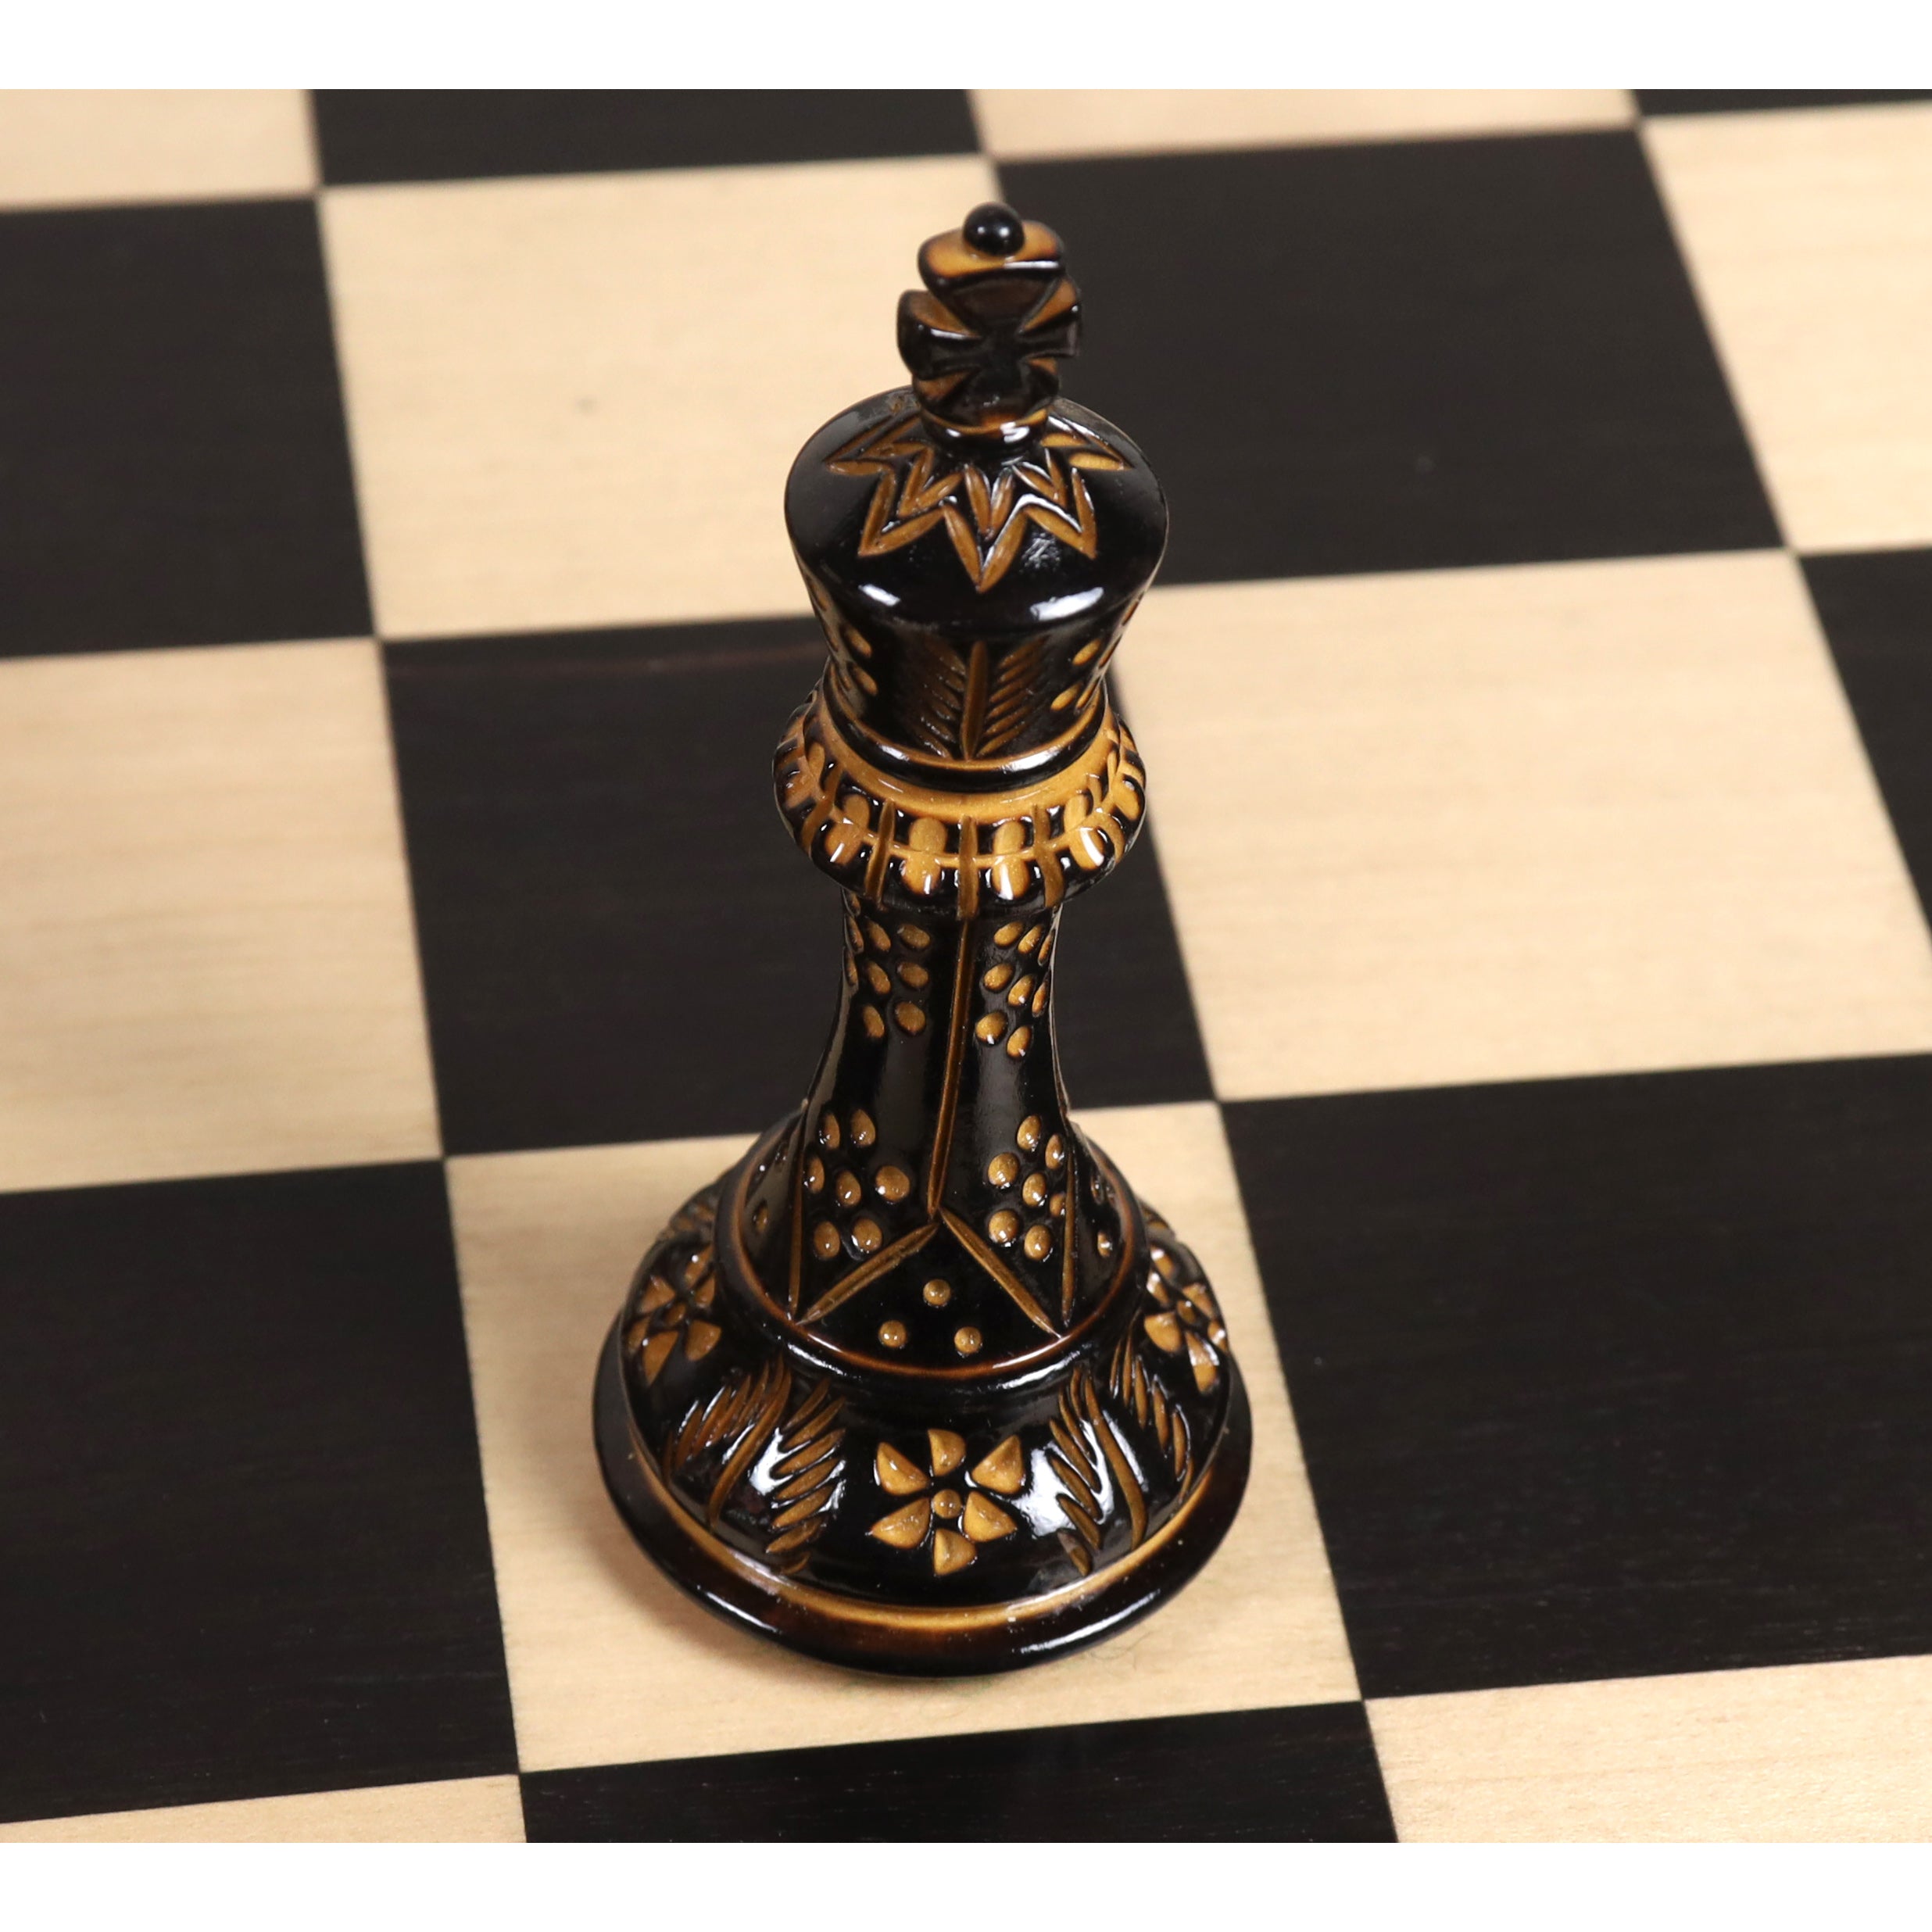 Combo of 4" Professional Staunton Chess Set - Pieces in Lacquered Burnt Boxwood with Board and Box